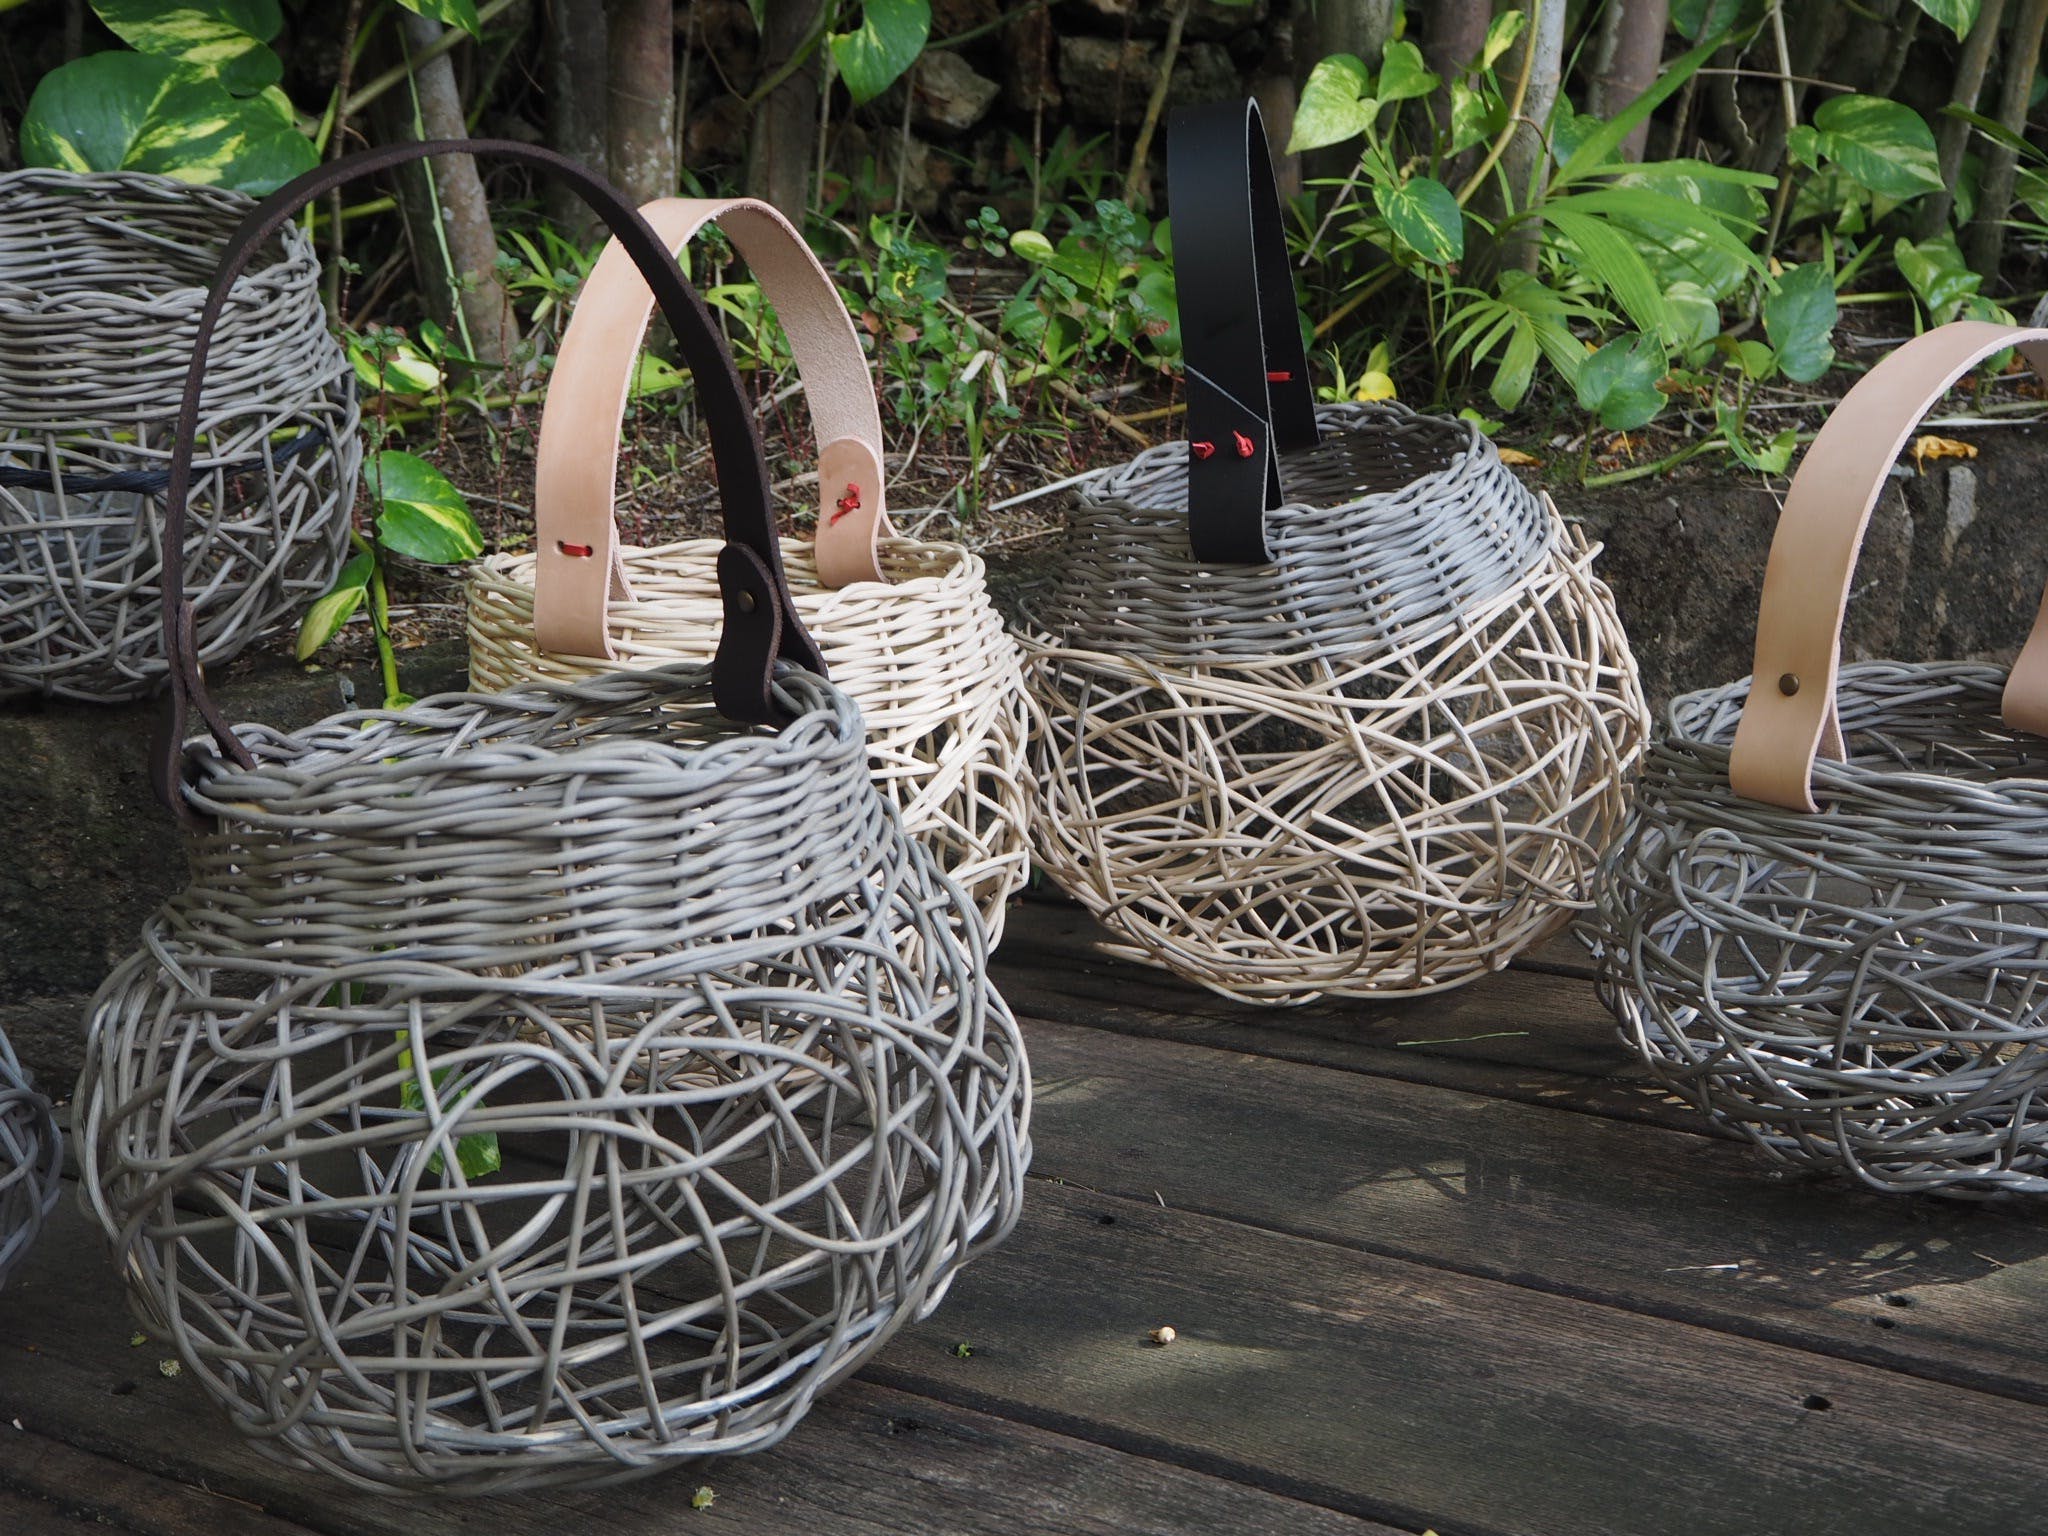 Weaving Woven Basket with Leather Handle - St Kilda Accommodation